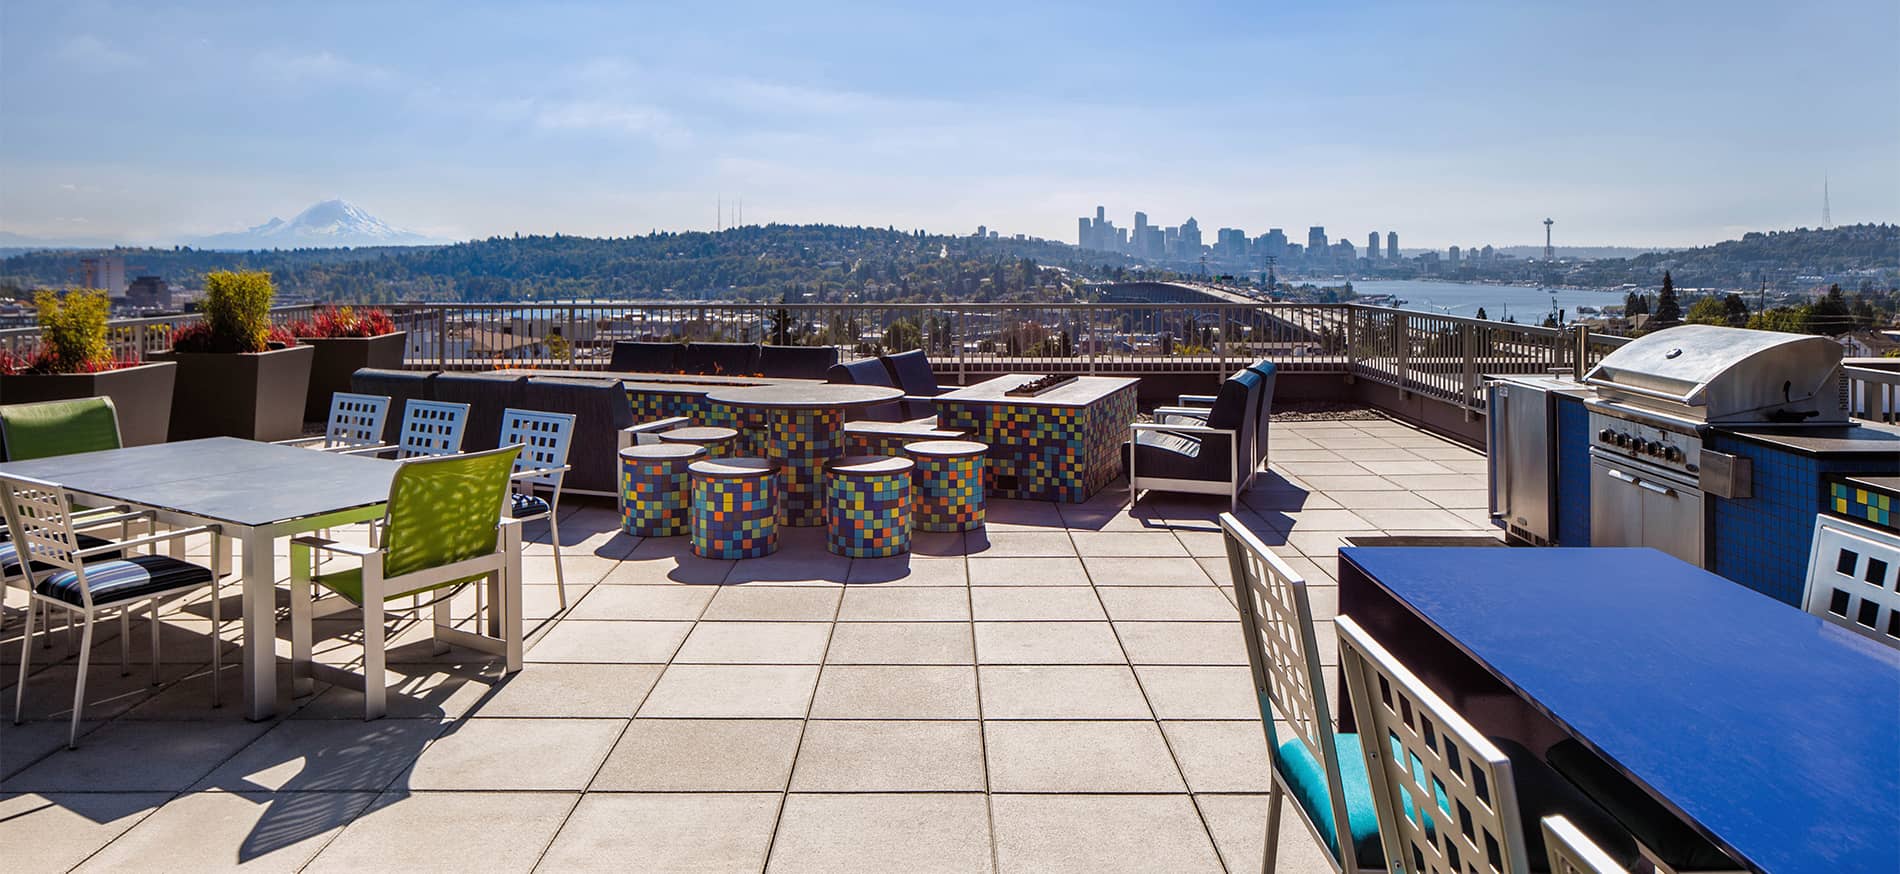 Lightbox Rooftop View of Seattle